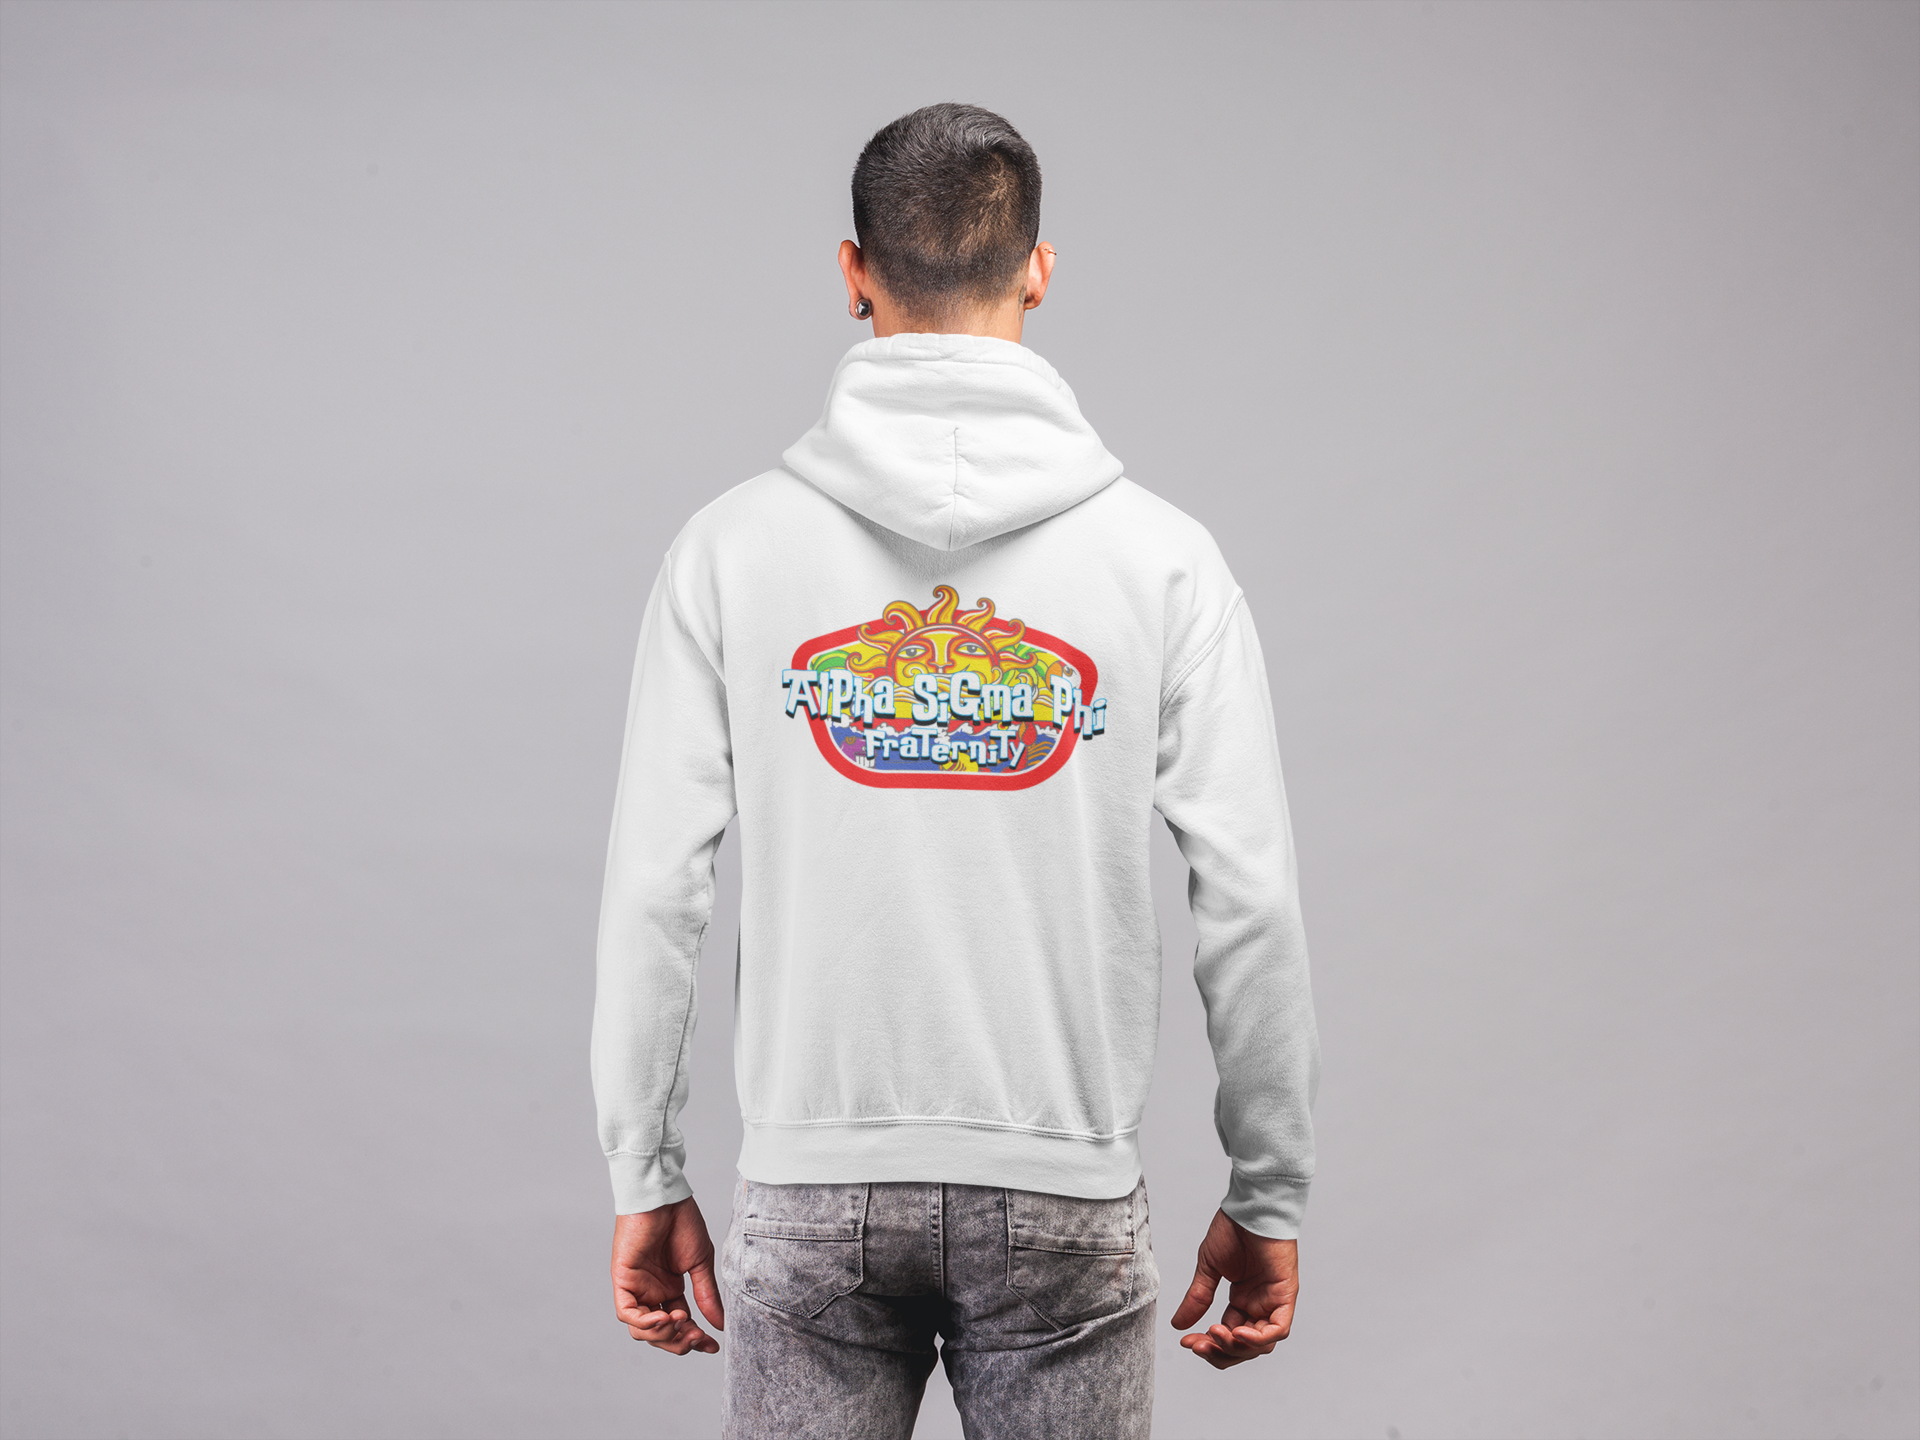 white Alpha Sigma Phi Graphic Hoodie | Summer Sol | Alpha Sigma Phi Fraternity Clothing back model 